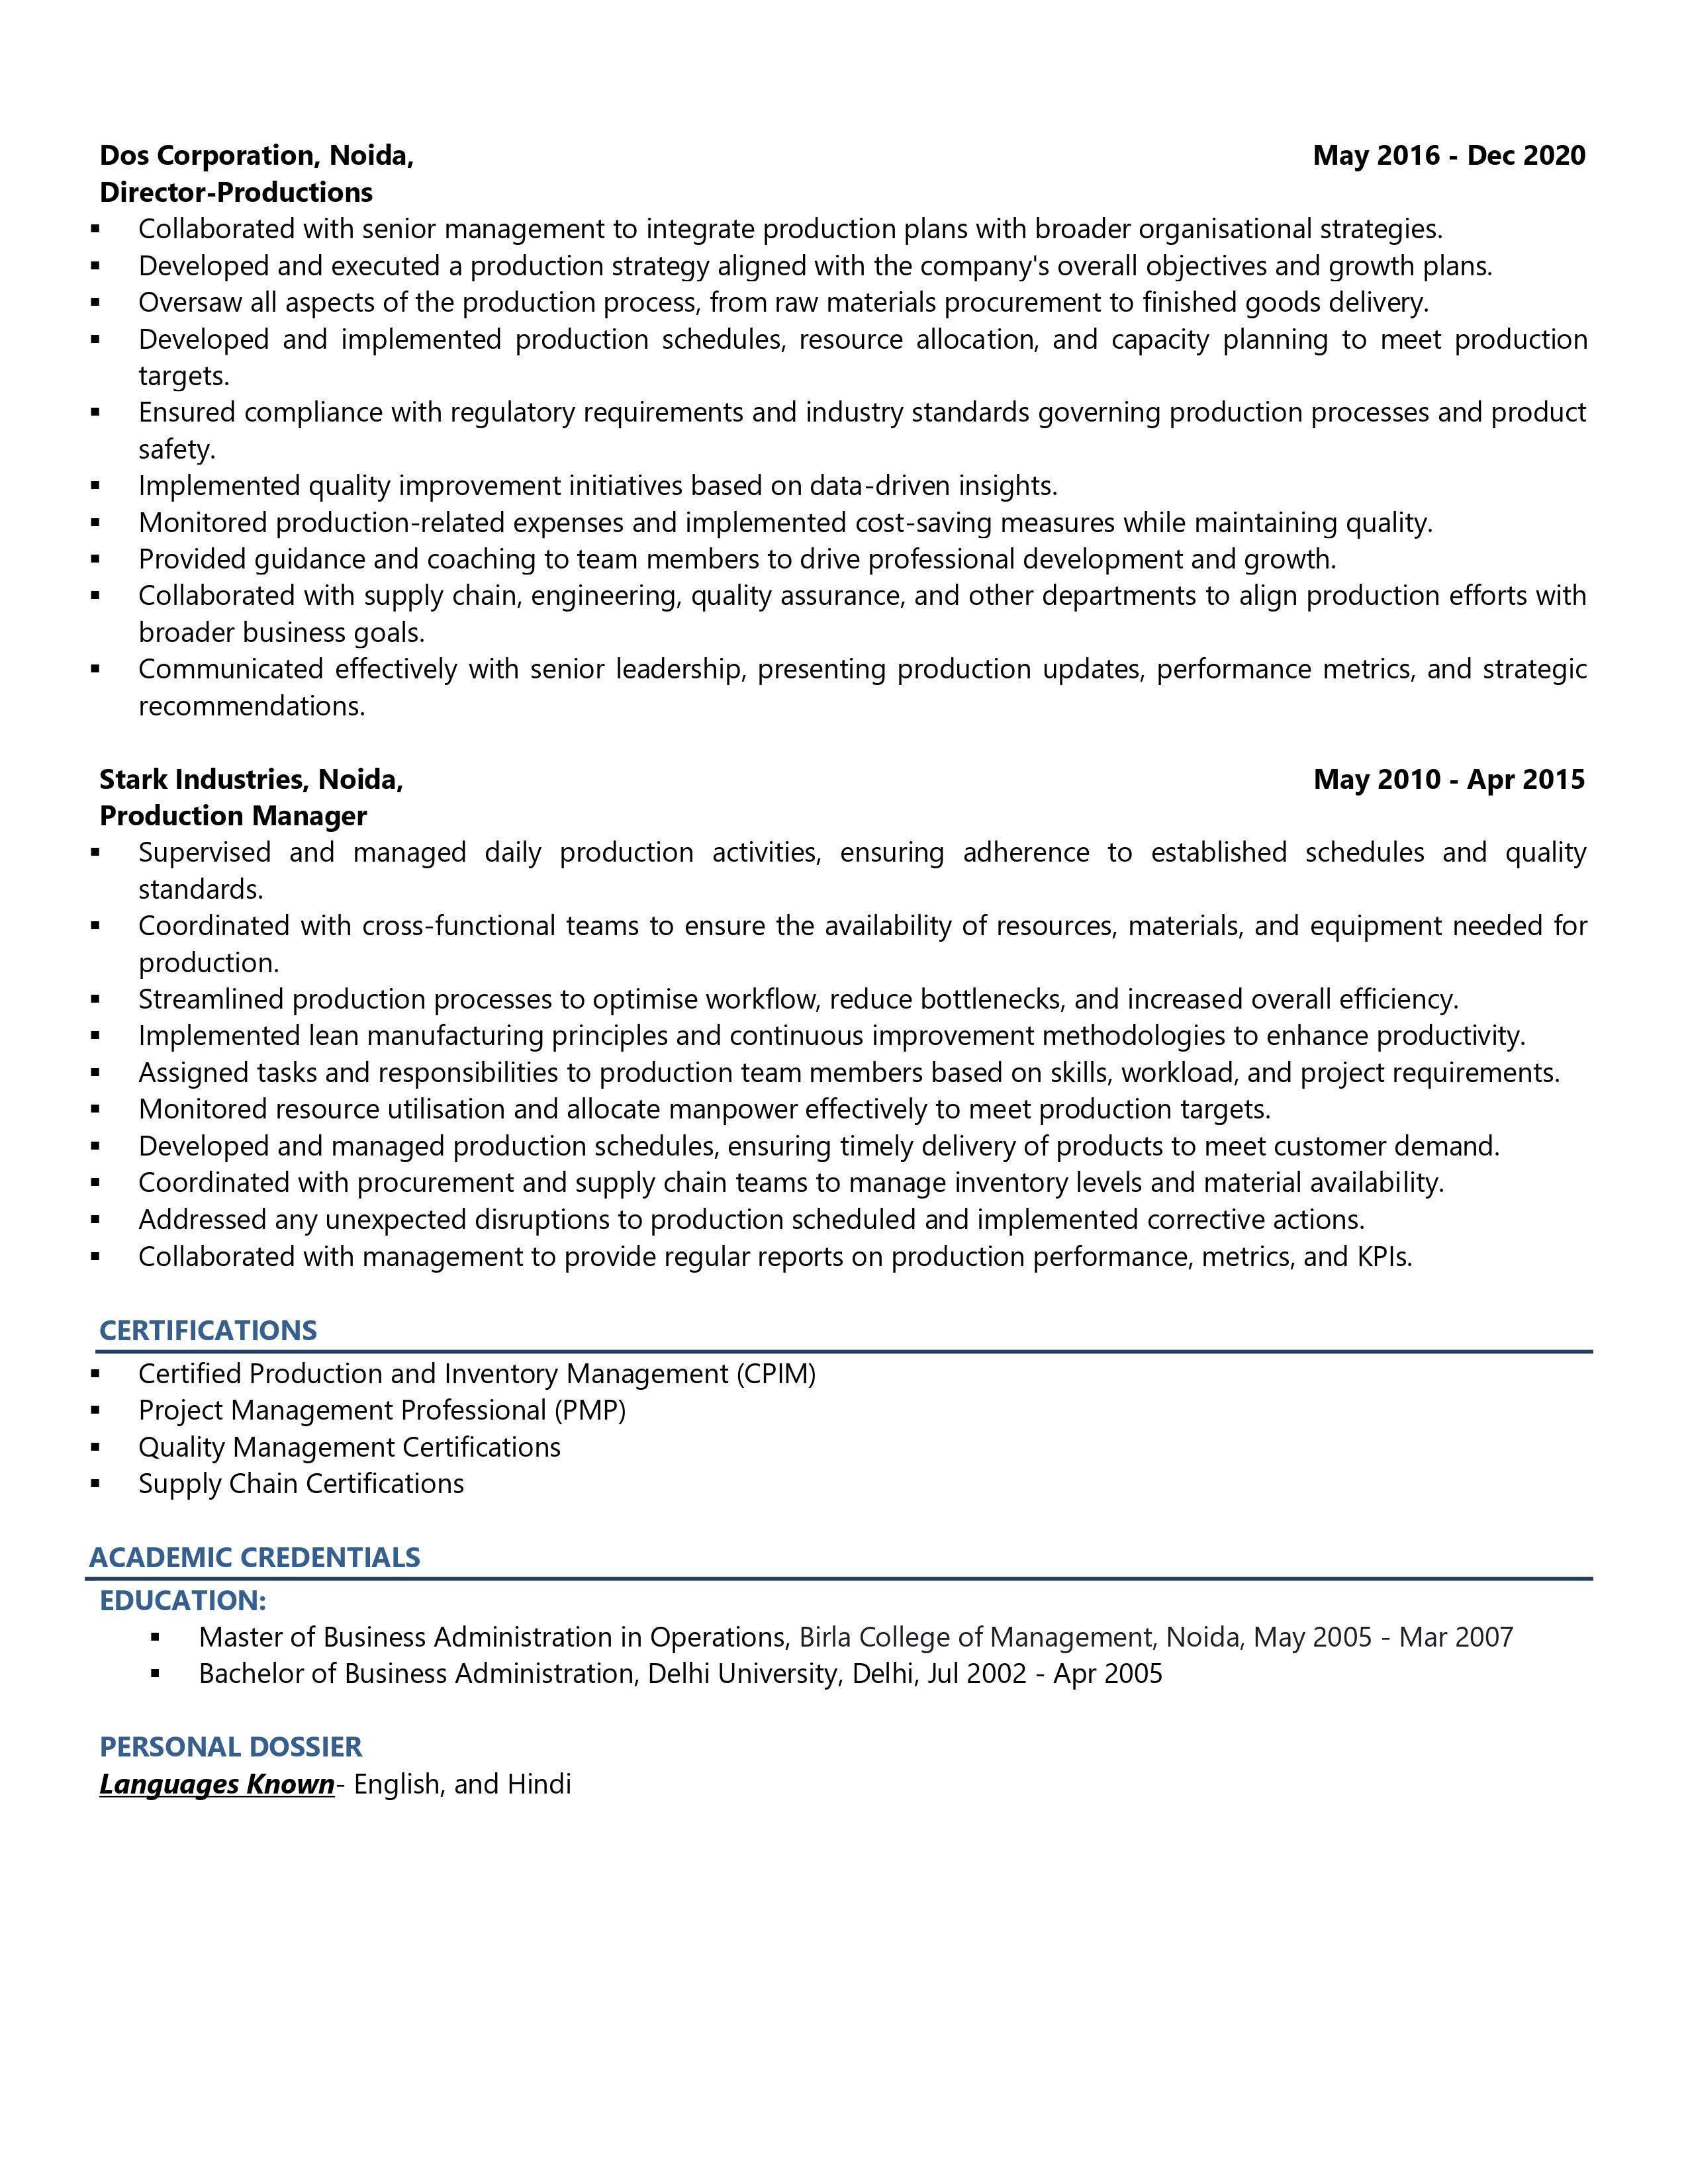 VP-Production - Resume Example & Template